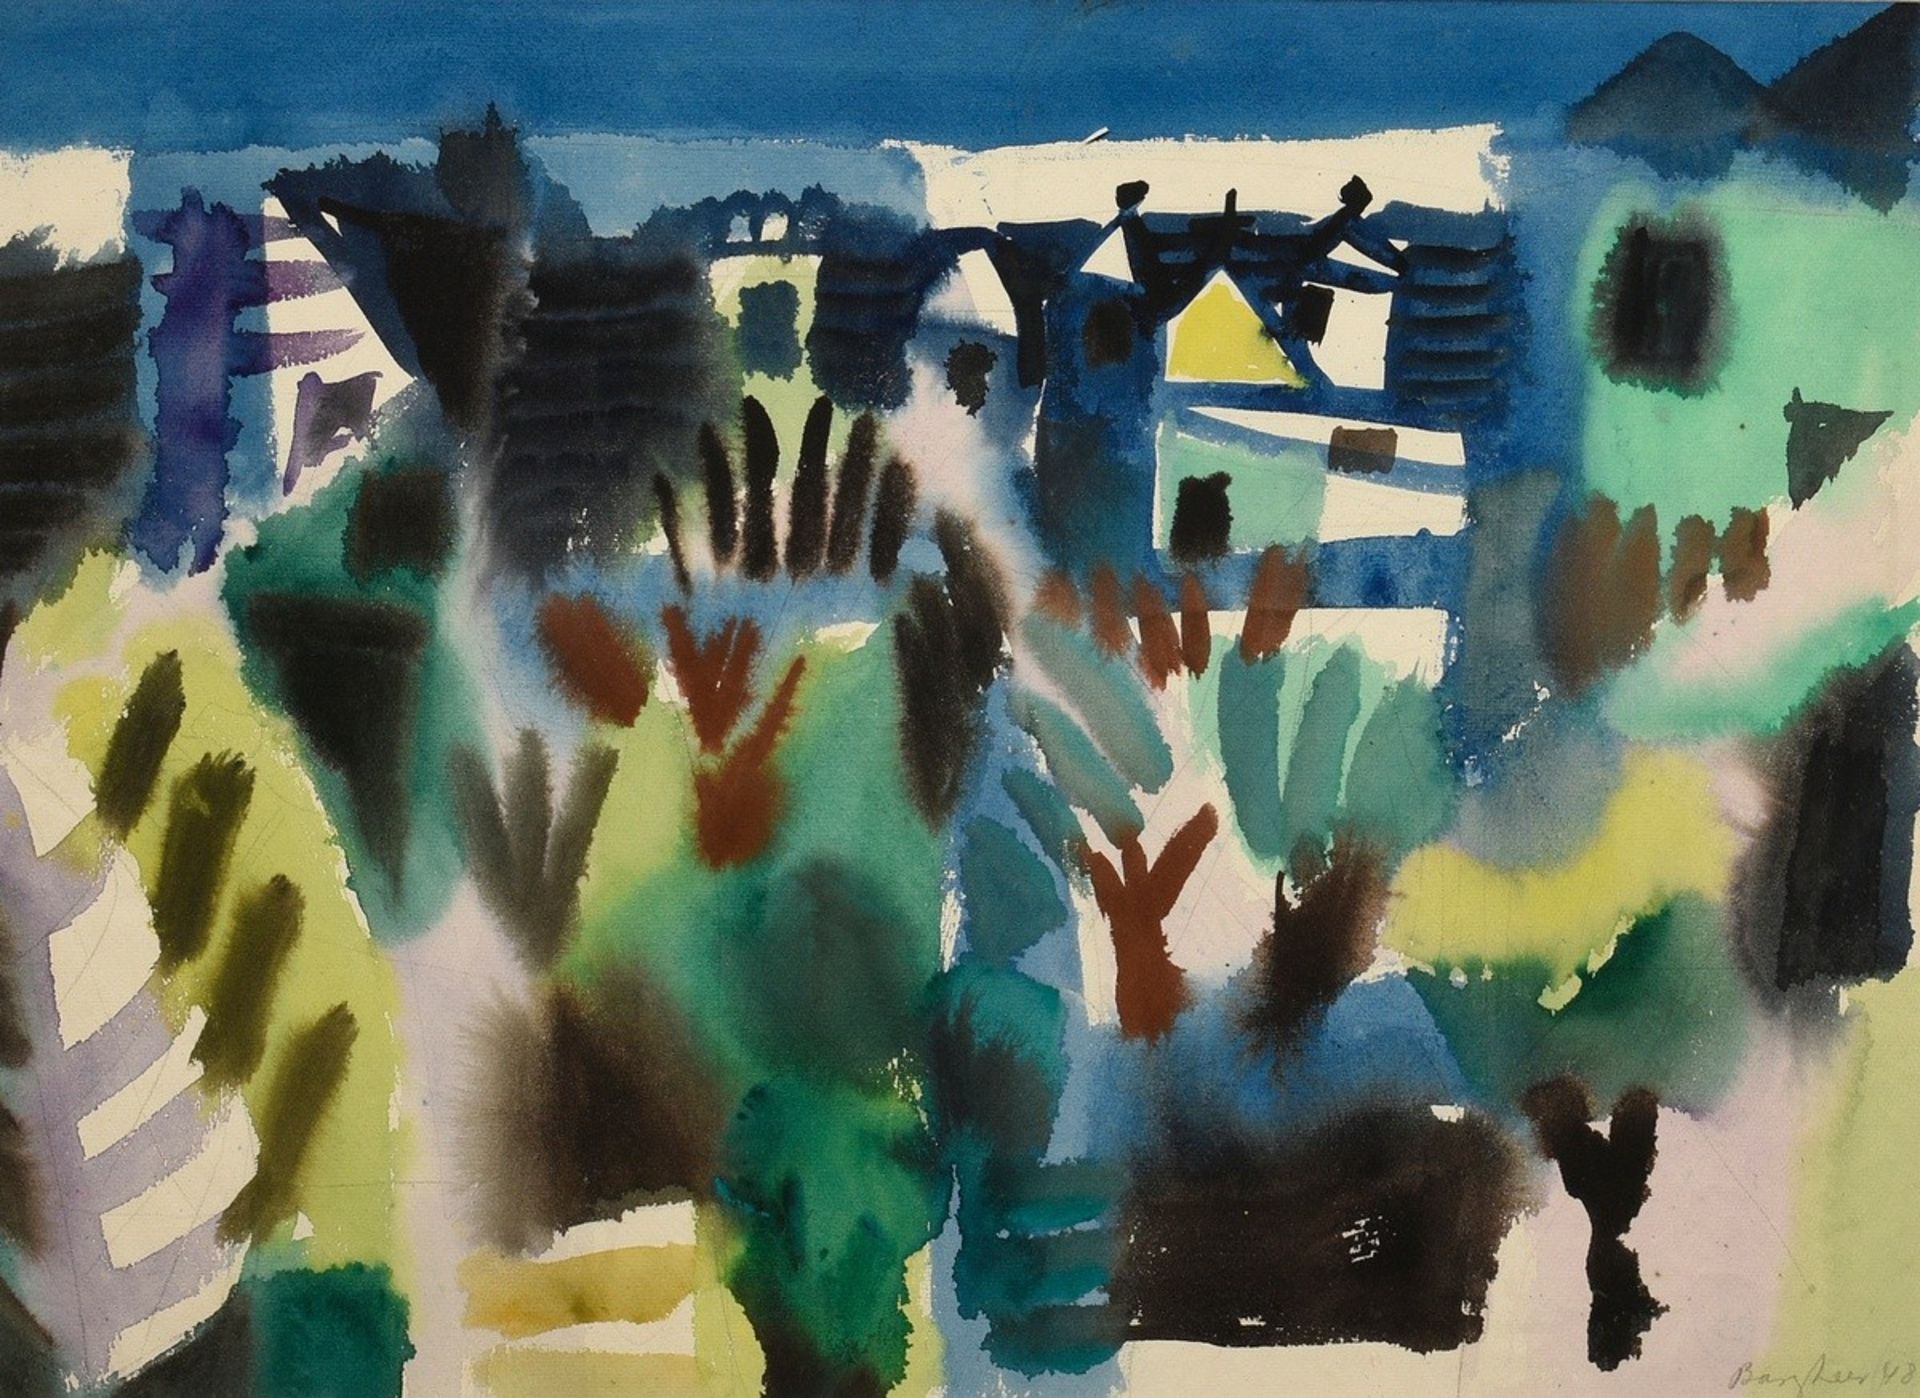 Bargheer, Eduard (1901-1979) "Trees and Houses" 1948, watercolour/pencil, sign./dat. lower right, U